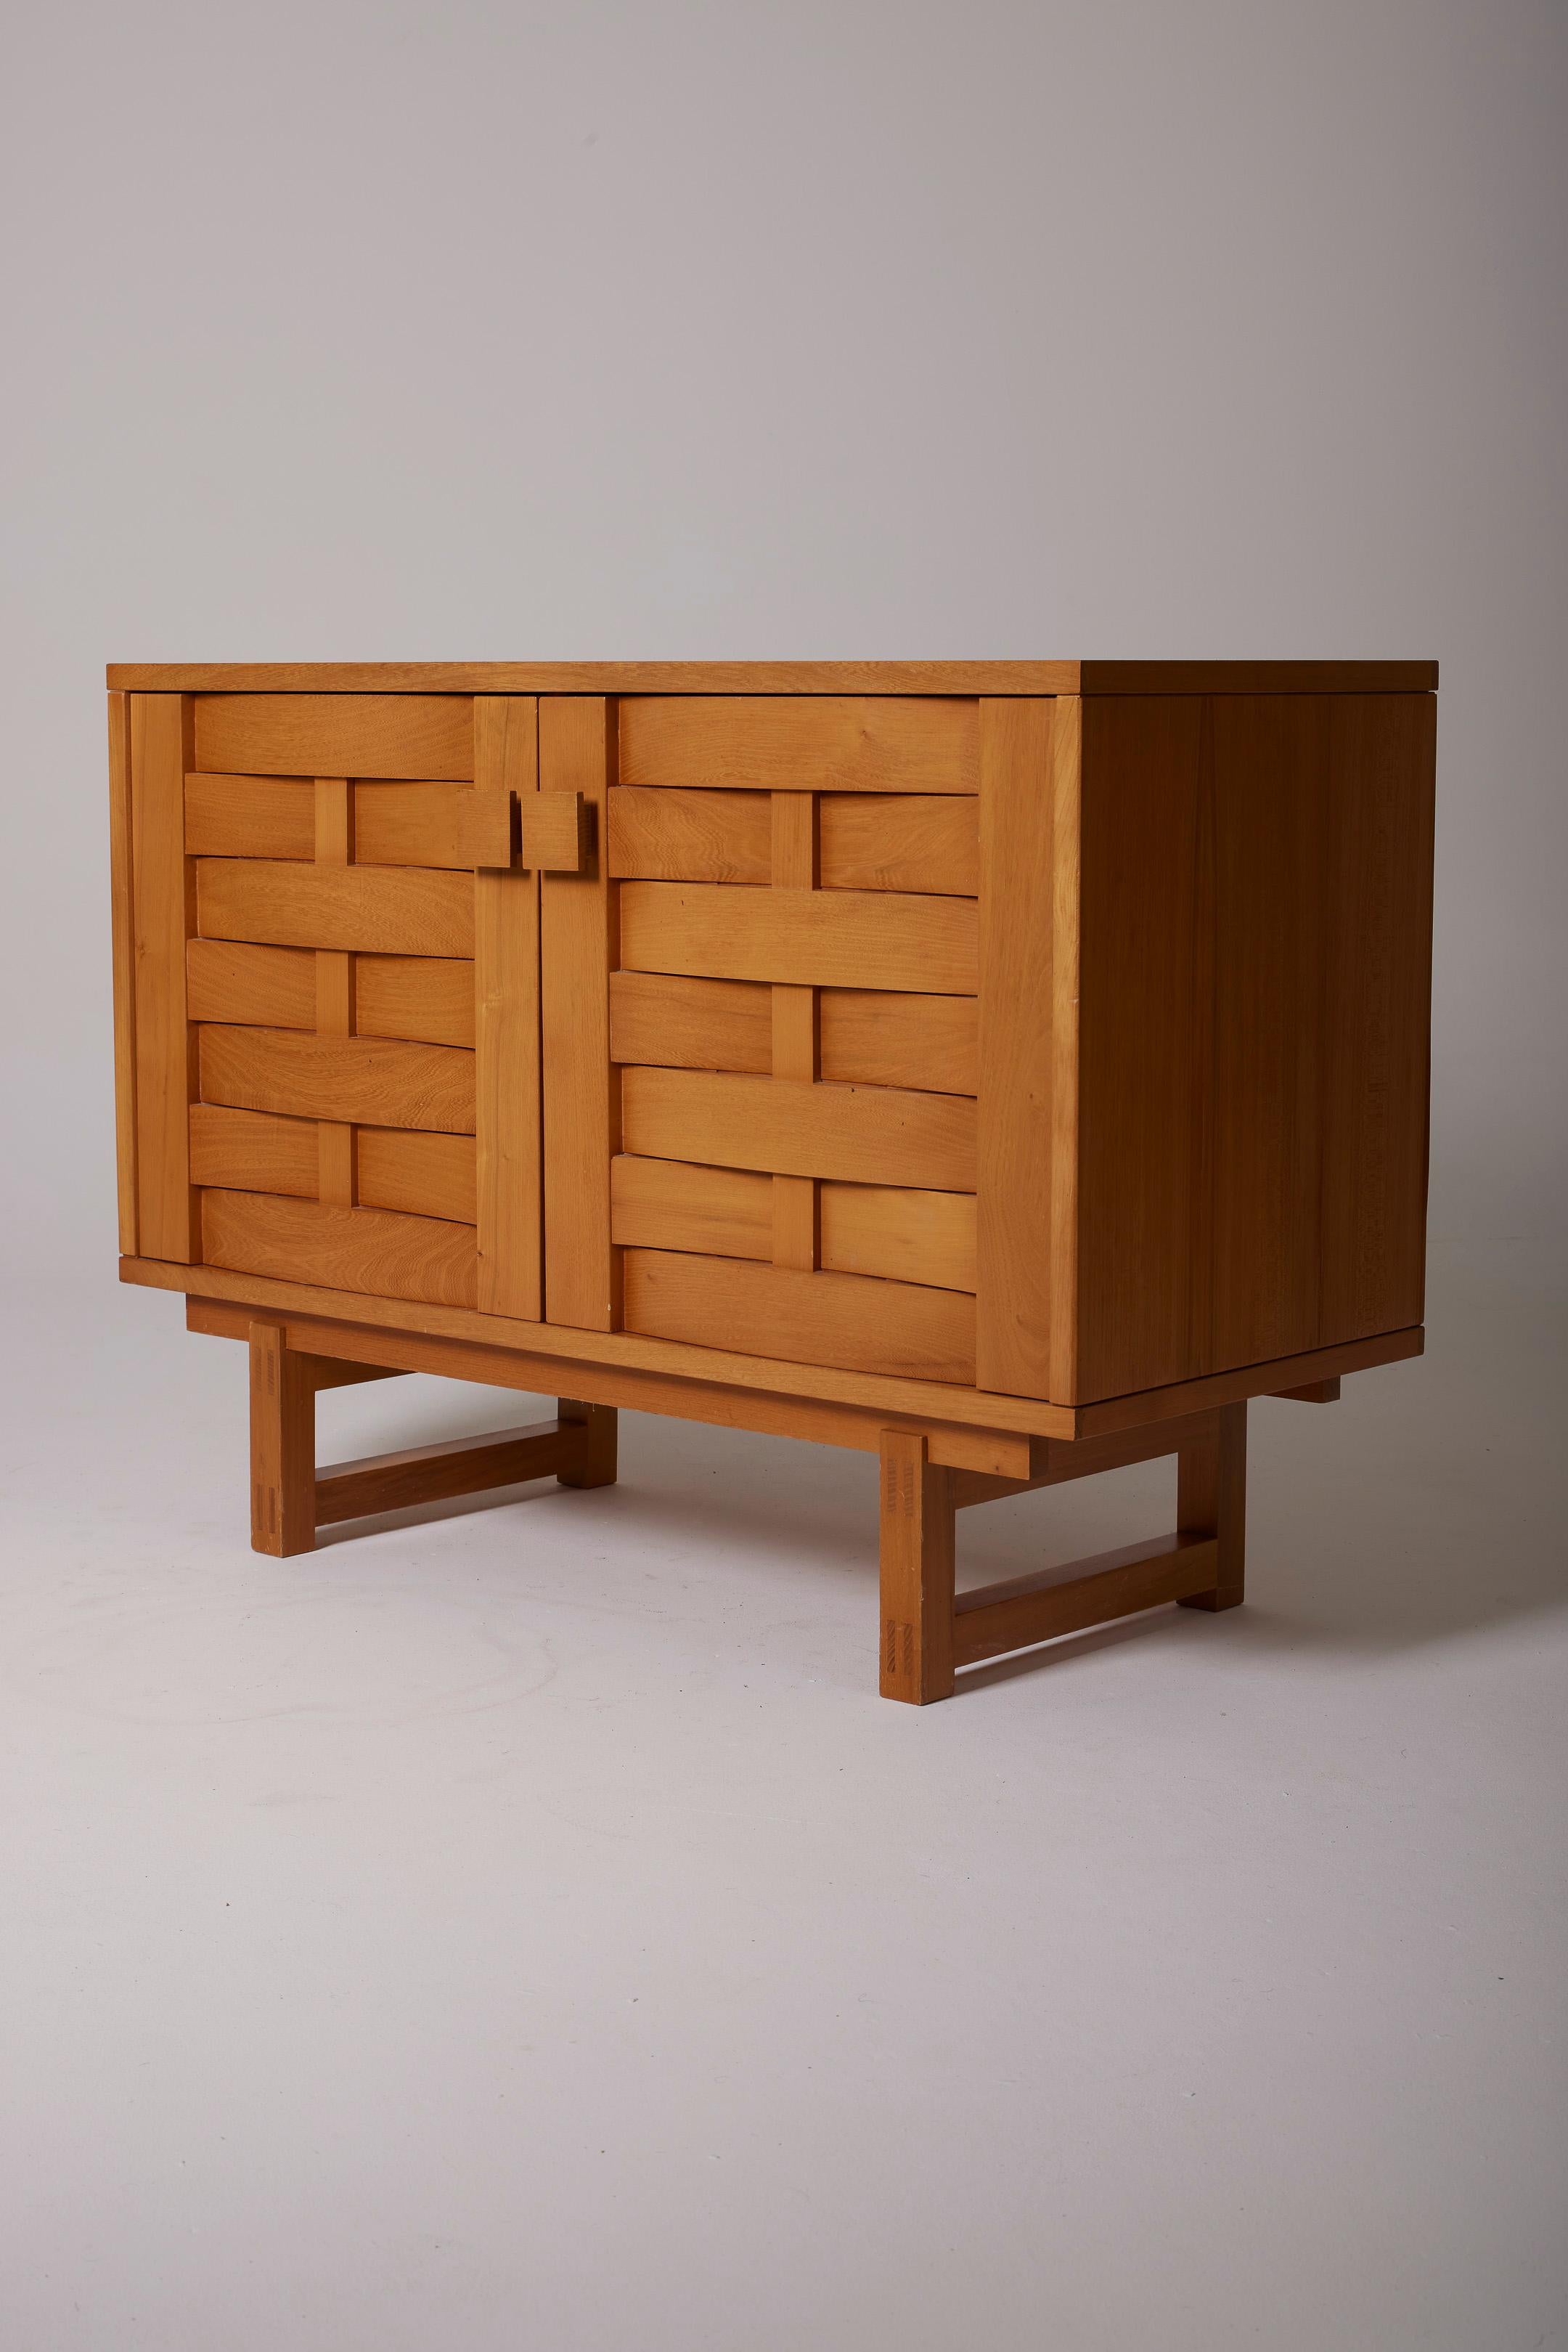 Solid ash brutalist sideboard dating from the 1960s-1970s. This sideboard features 2 swinging doors on the front with carved wood, opening to reveal 2 compartments, each with a shelf.
LP3032